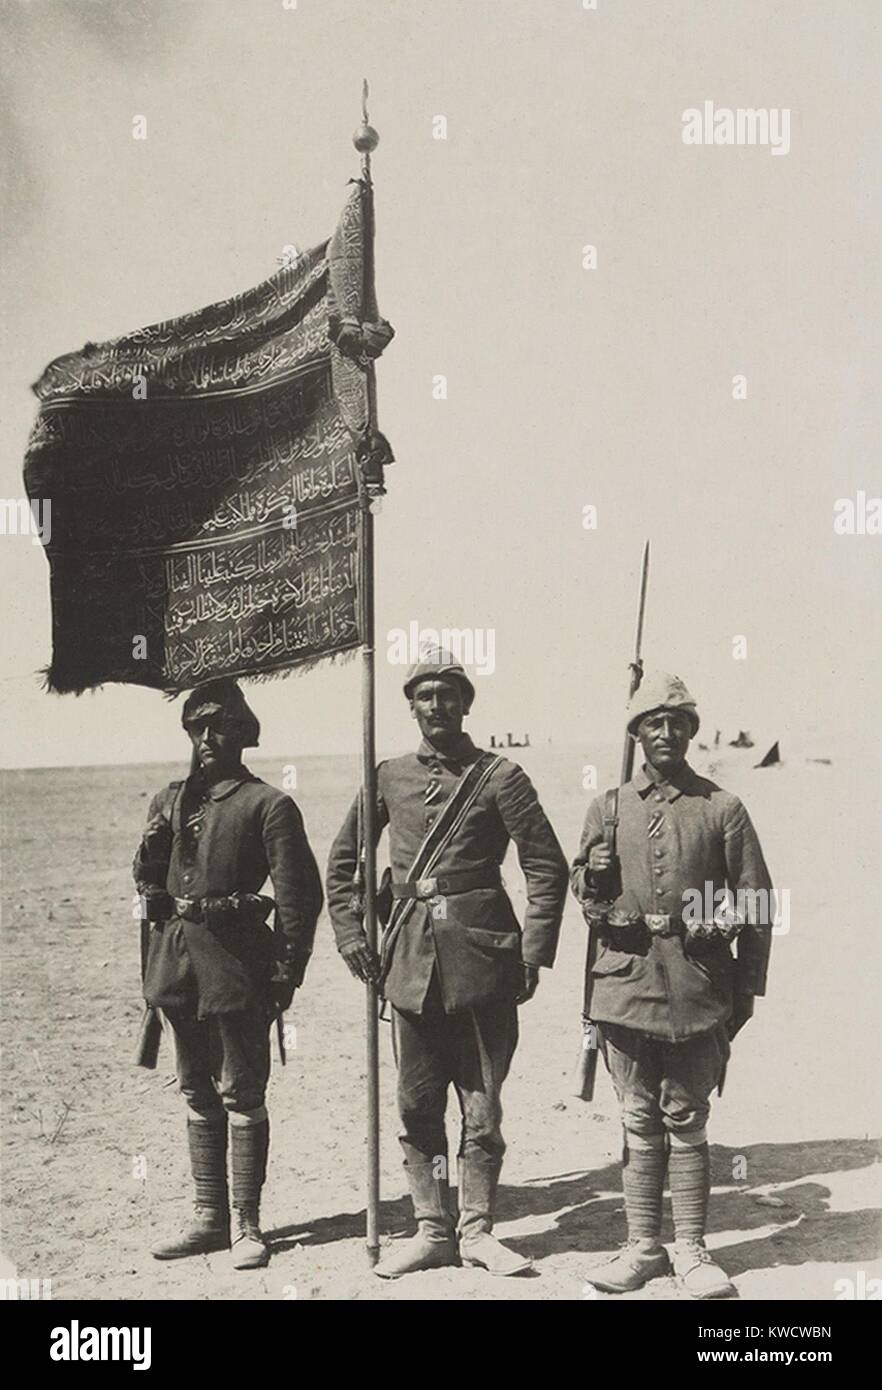 World War 1 in the Middle East. A regimental standard with Arabic calligraphy was presented to the Defenders of Gaza, who repulsed the first British Attack in March 1915. (BSLOC 2013 1 63) Stock Photo